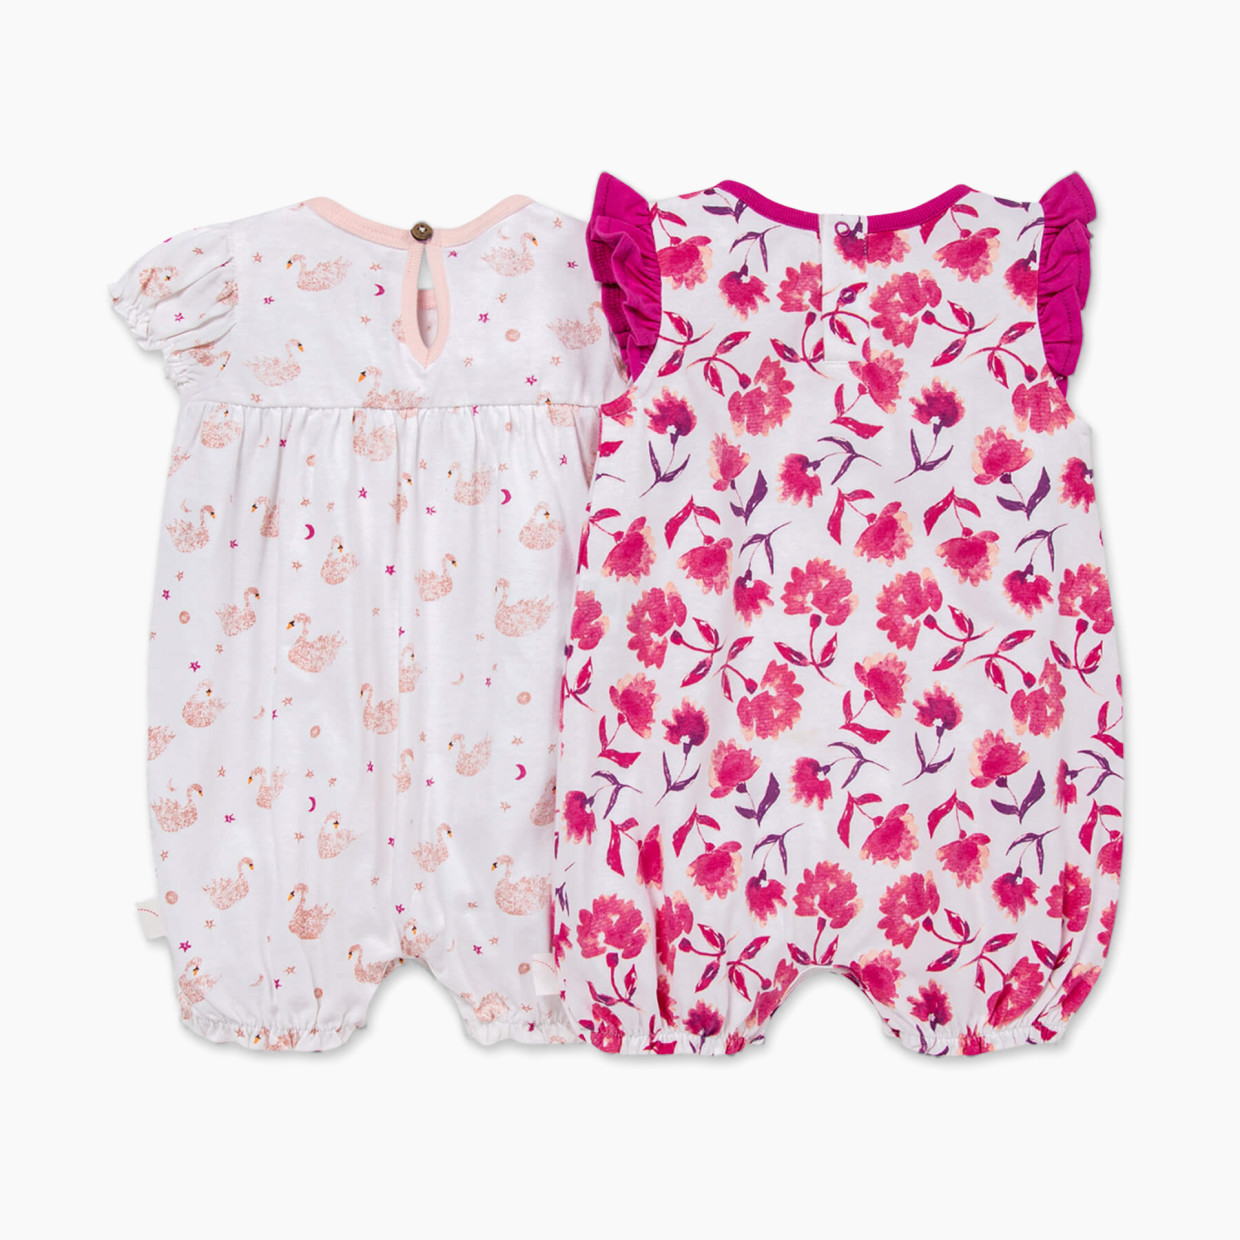 Burt's Bees Baby 2 Pack Rompers - Graceful Swans, 3-6 Months.